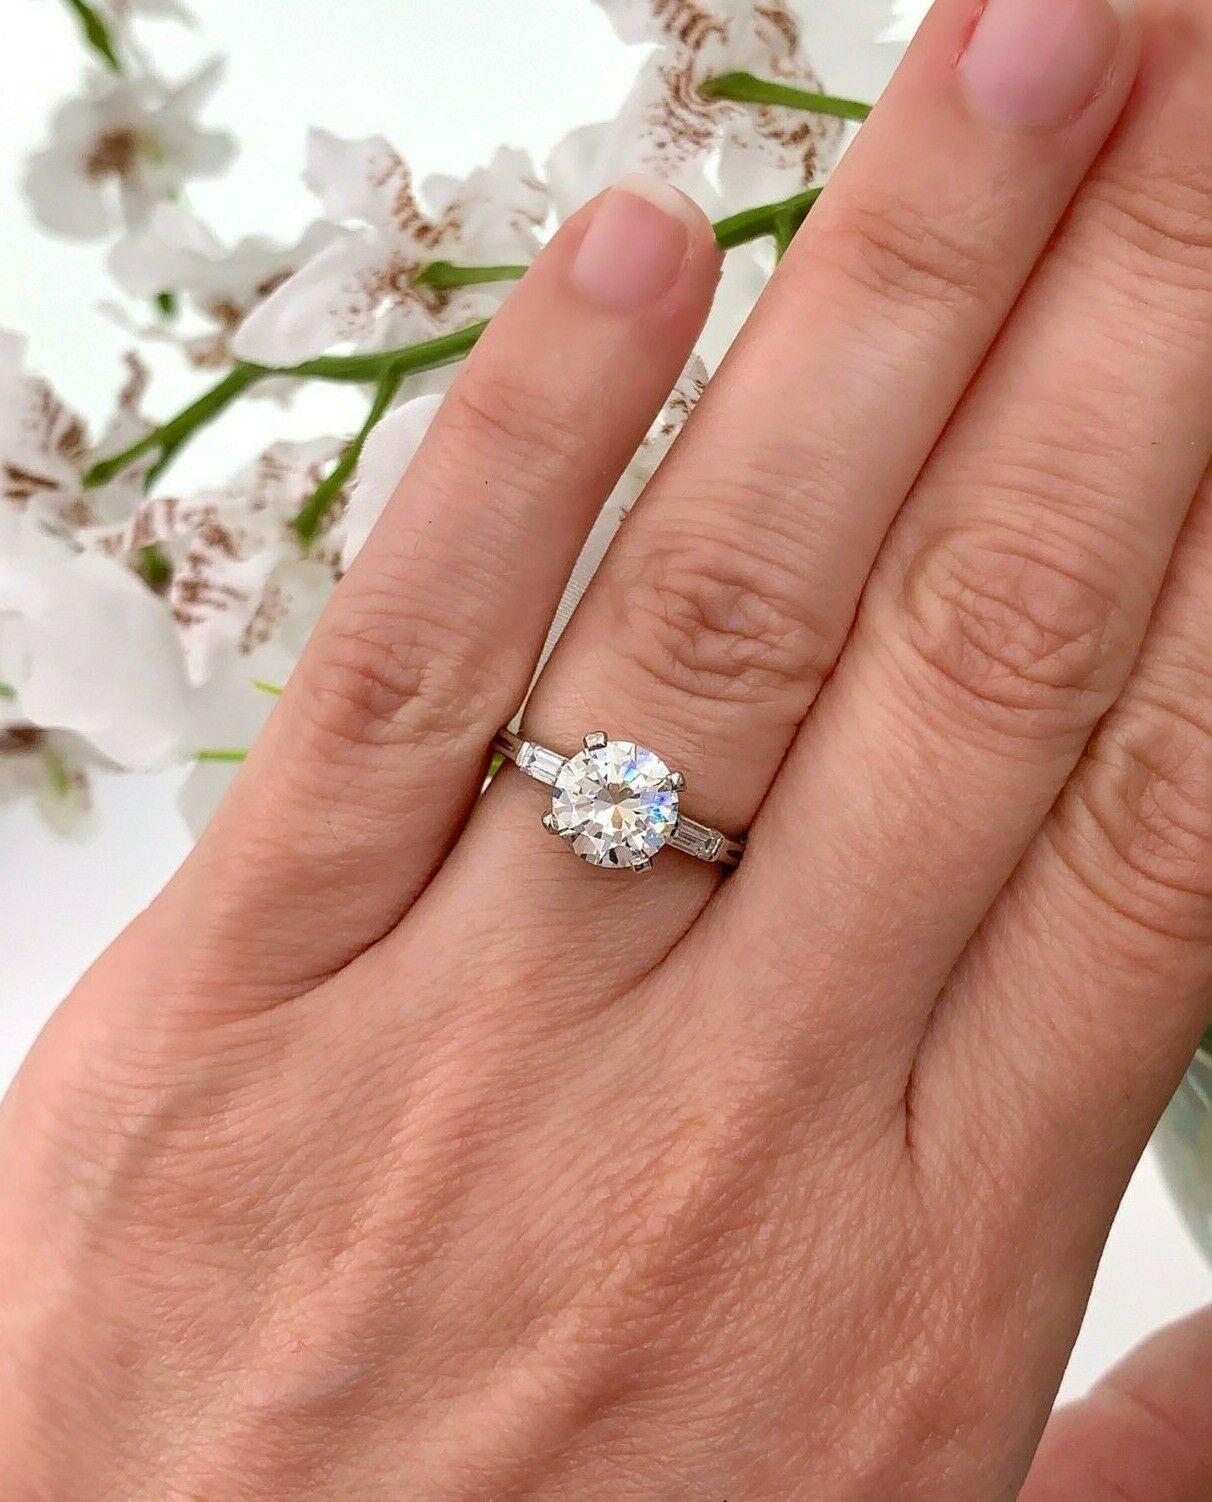 Vintage Tiffany & Co. Round Diamond 1.72 Carat Engagement Ring GIA H VS2 In Excellent Condition For Sale In San Diego, CA